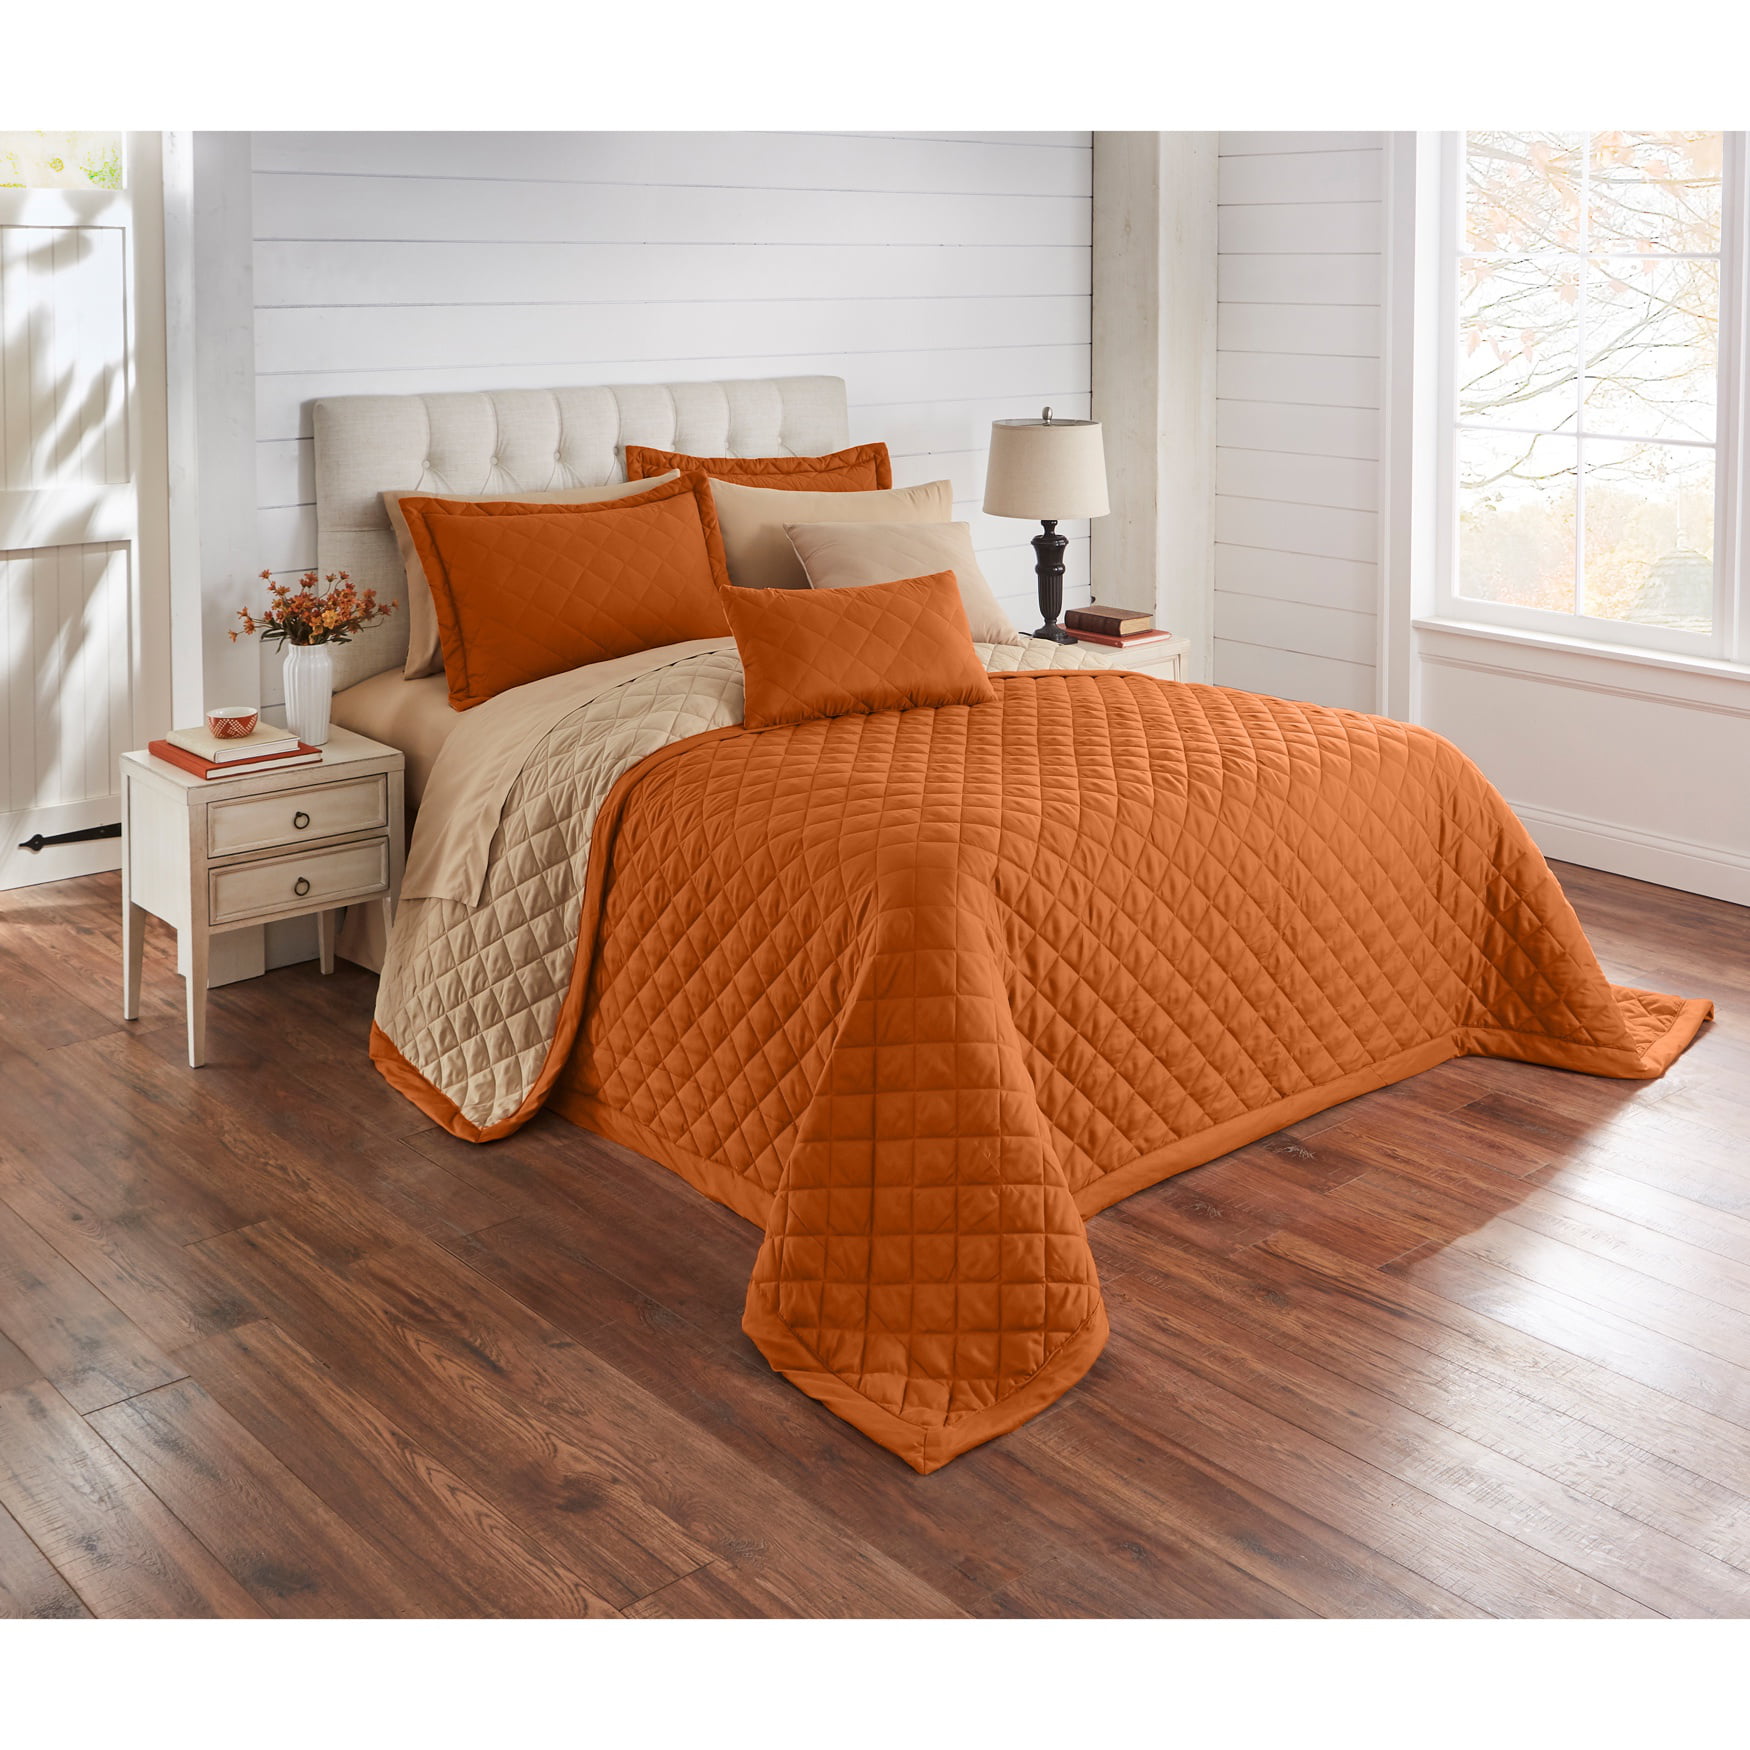 Queen Gold Maize BrylaneHome Reversible Quilted Bedspread